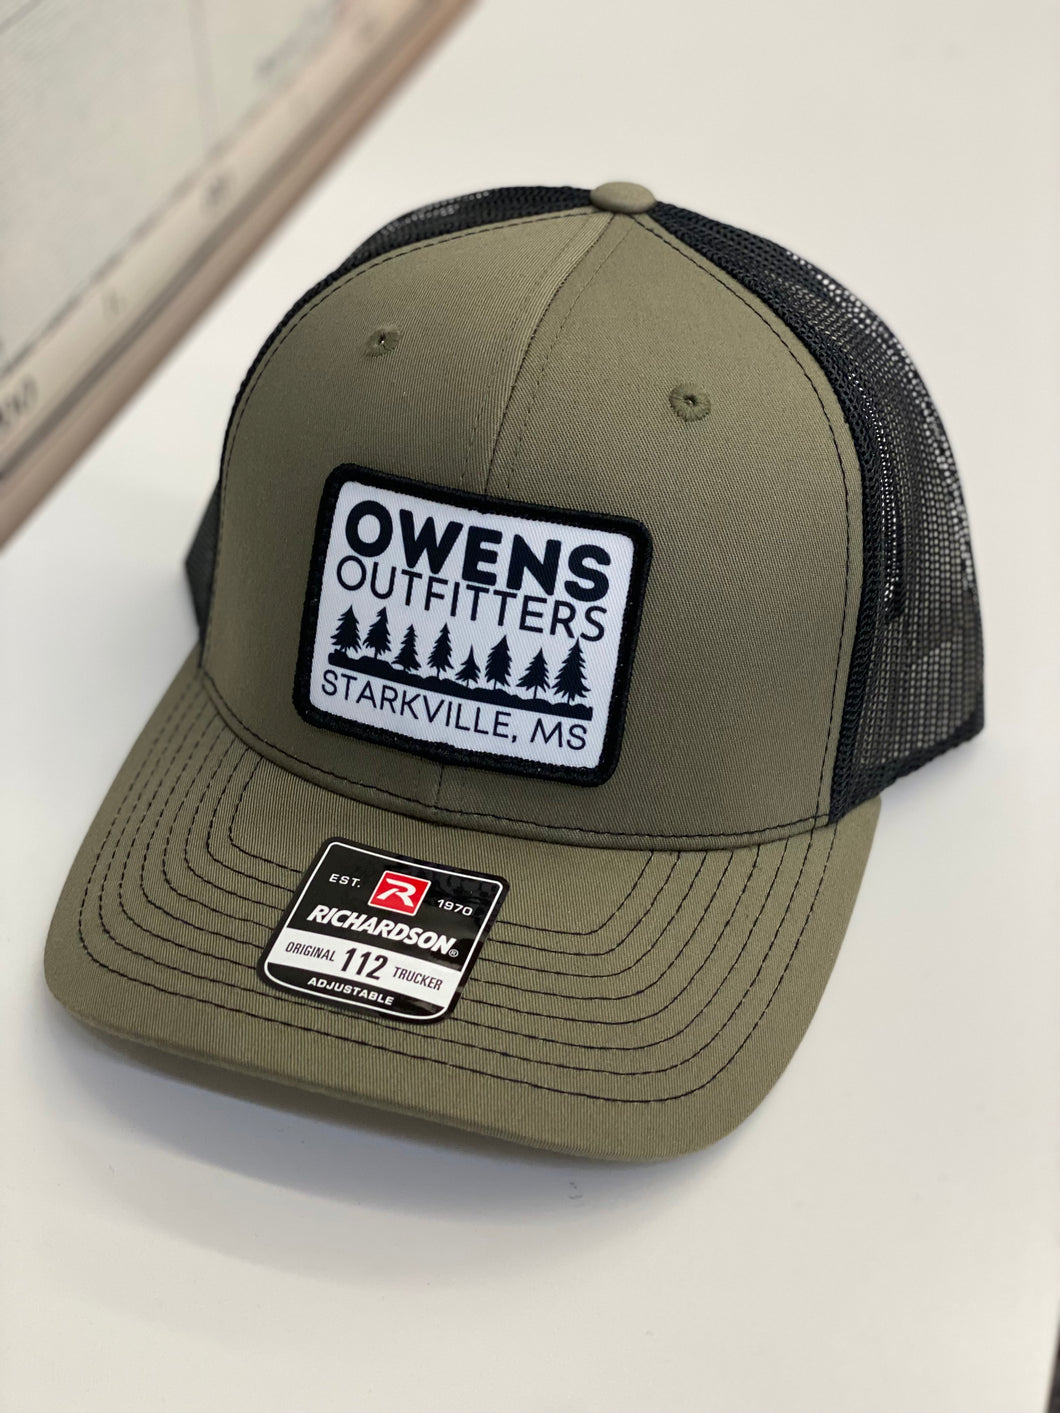 Owens Outfitters Pine Hat - 112